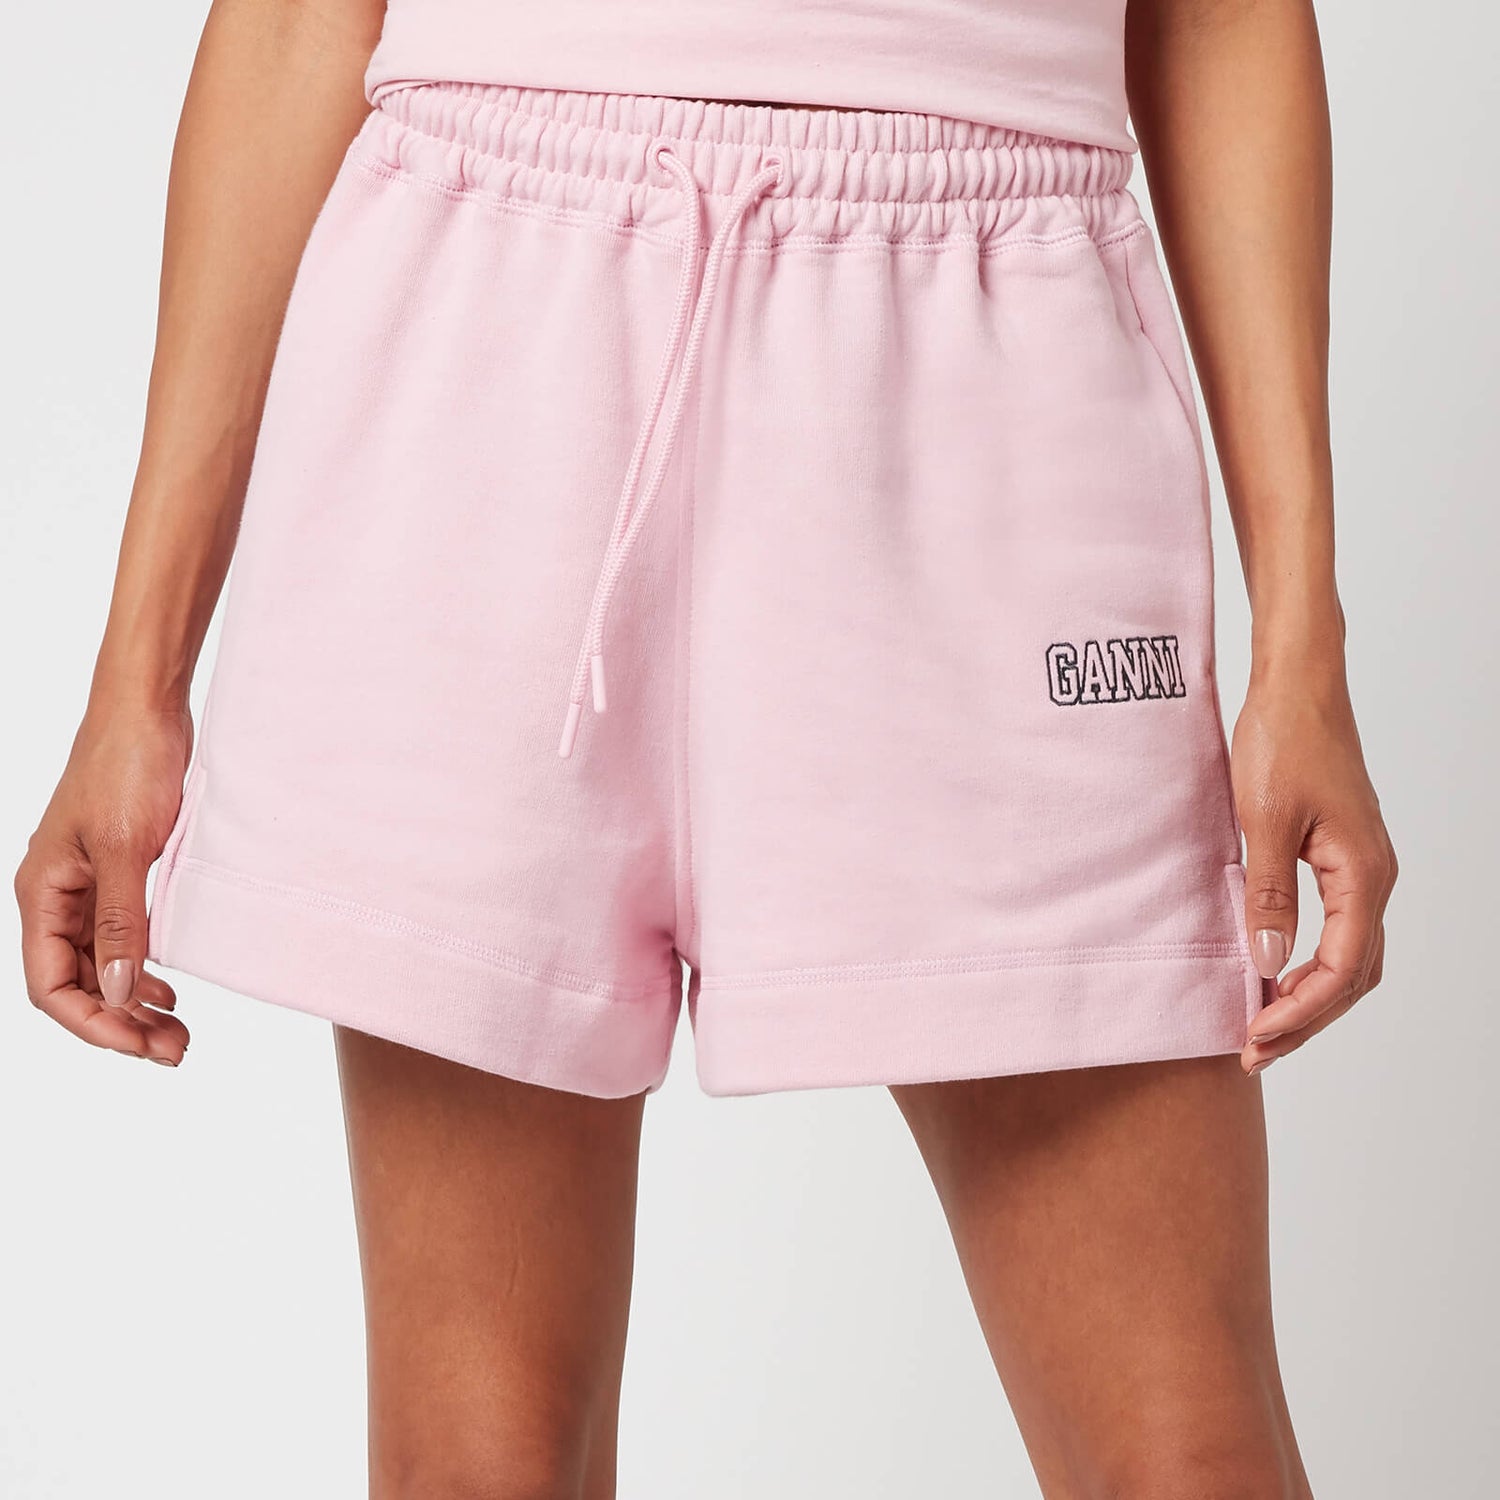 Ganni Women's Isoli Shorts - Sweet Lilac - Free UK Delivery Available